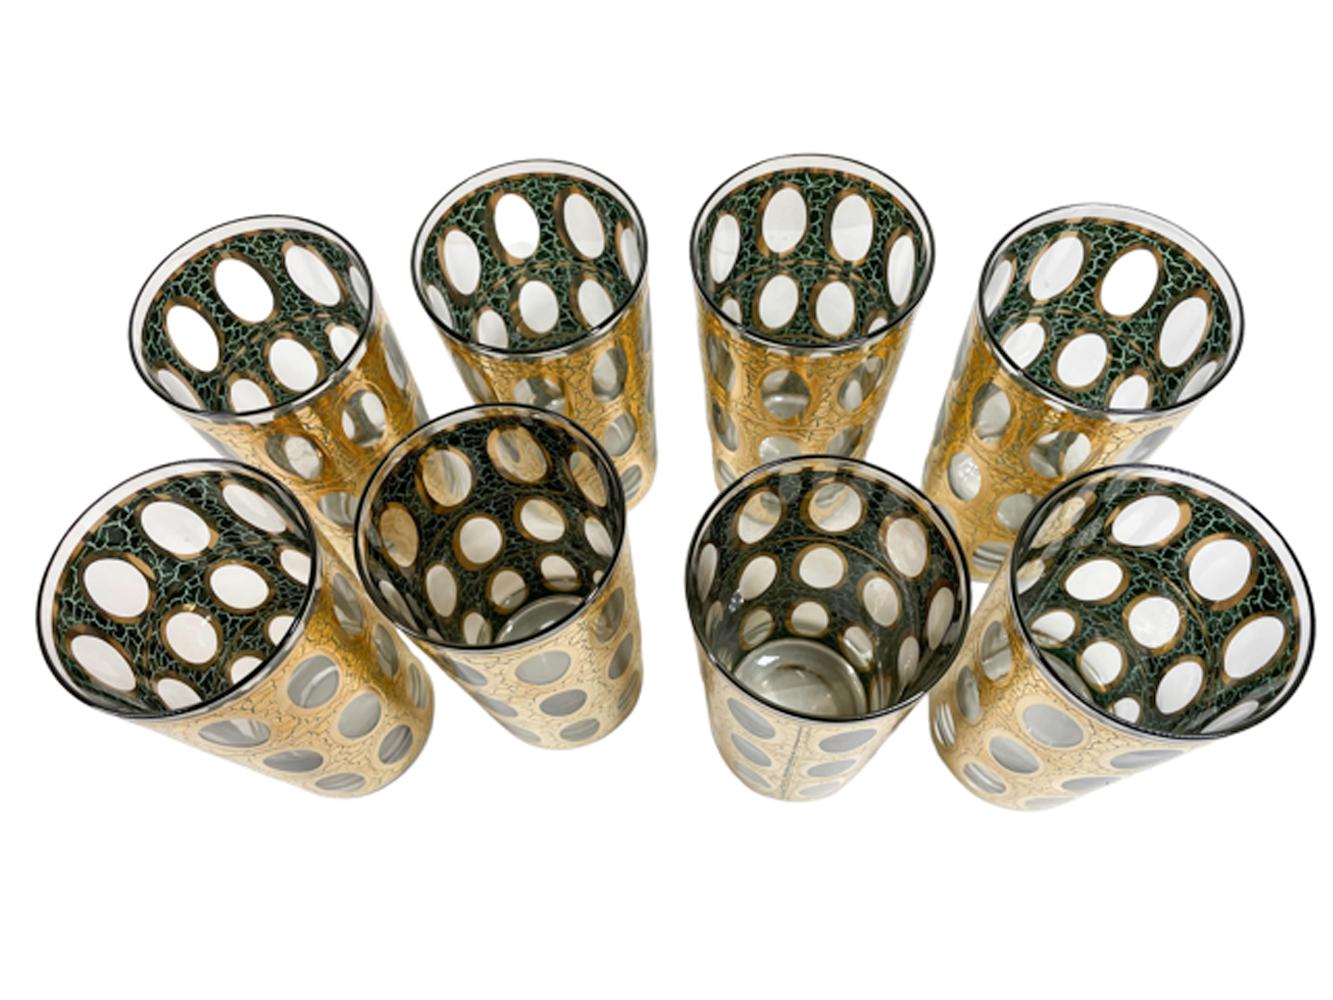 Eight mid 20th century highball glasses by Culver, LTD in the 